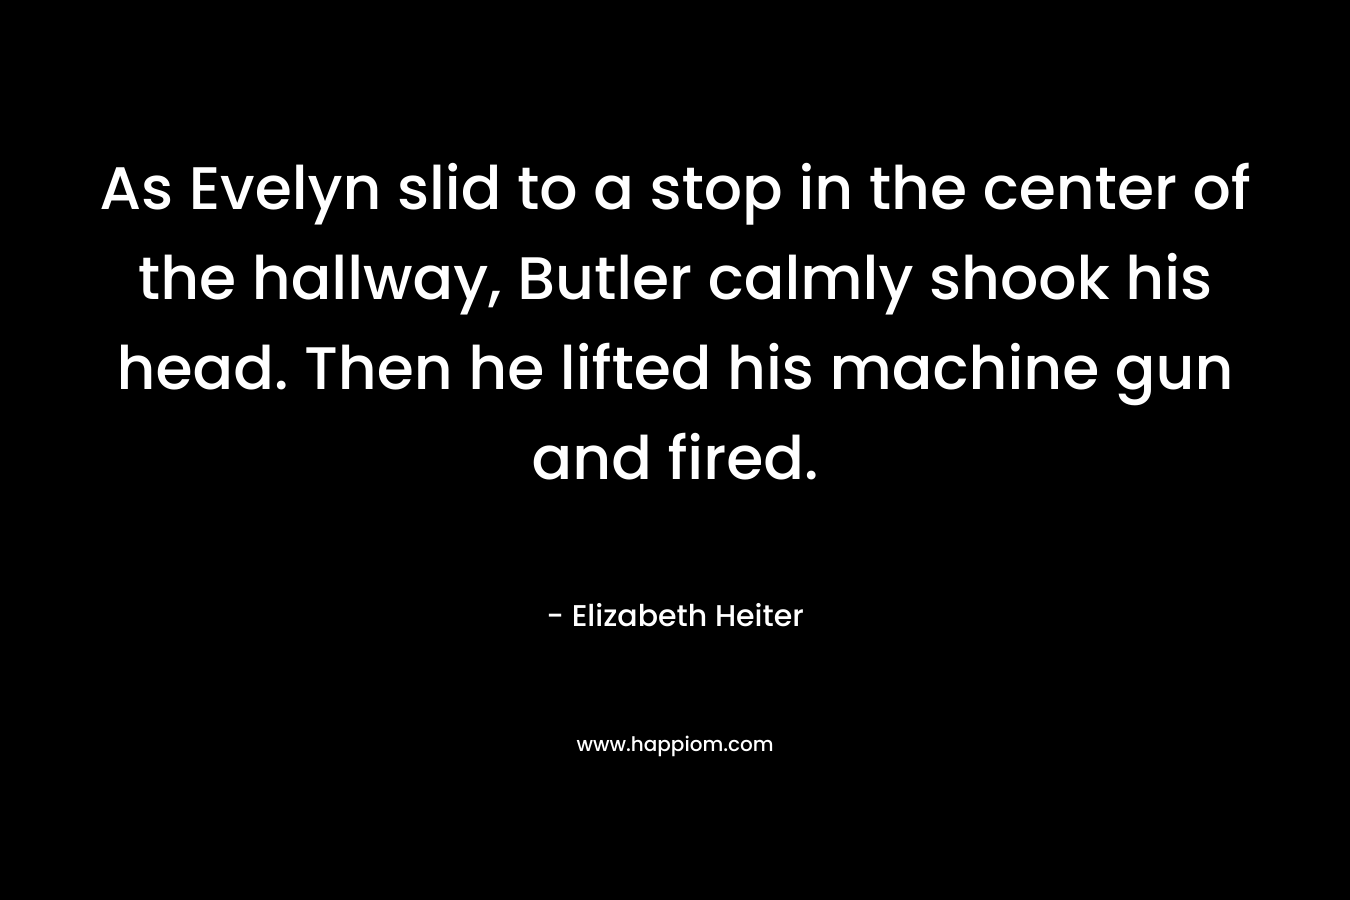 As Evelyn slid to a stop in the center of the hallway, Butler calmly shook his head. Then he lifted his machine gun and fired.